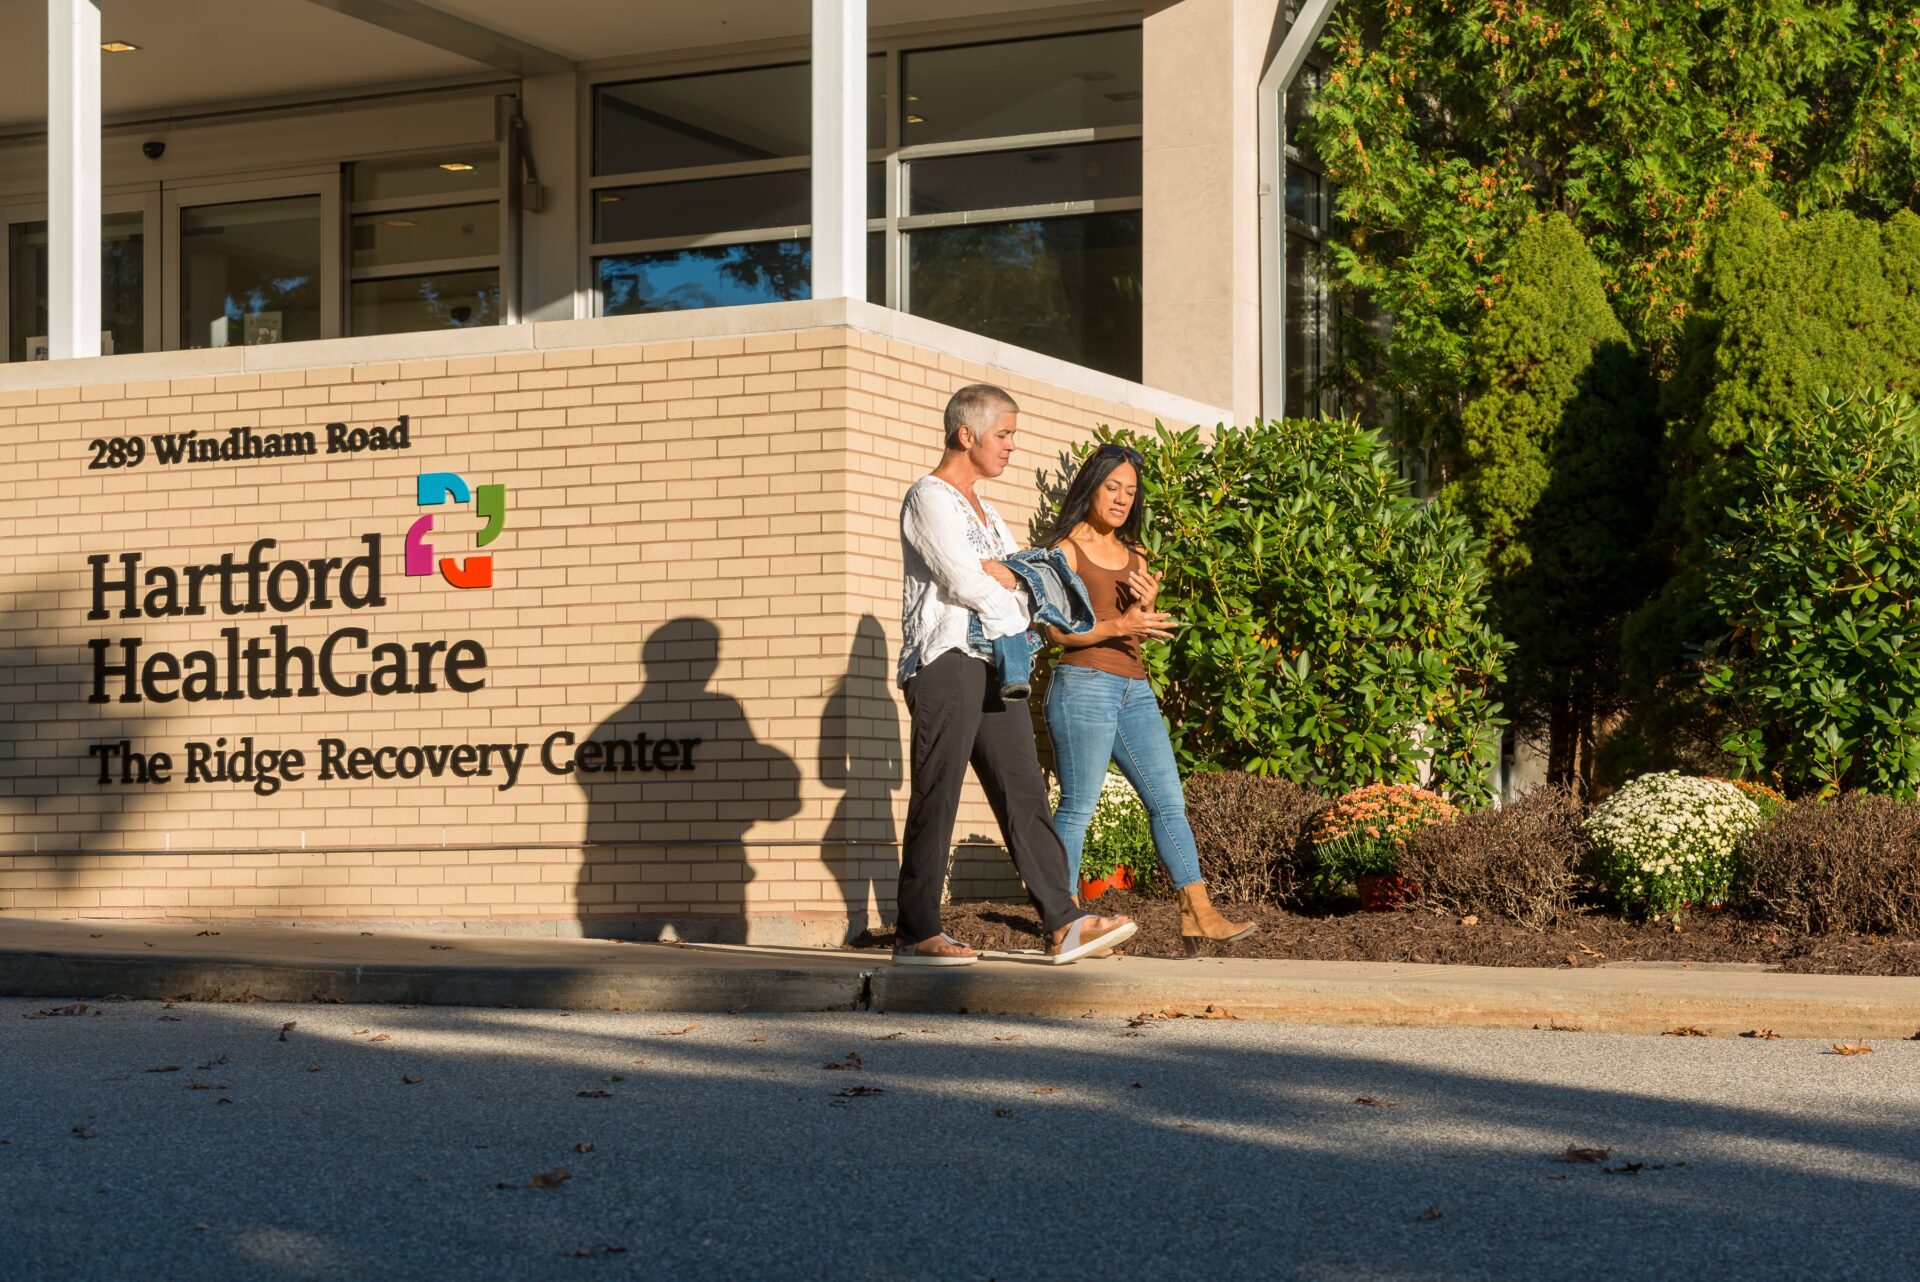 Two women walking in front of the Ridge Recovery Center sign.